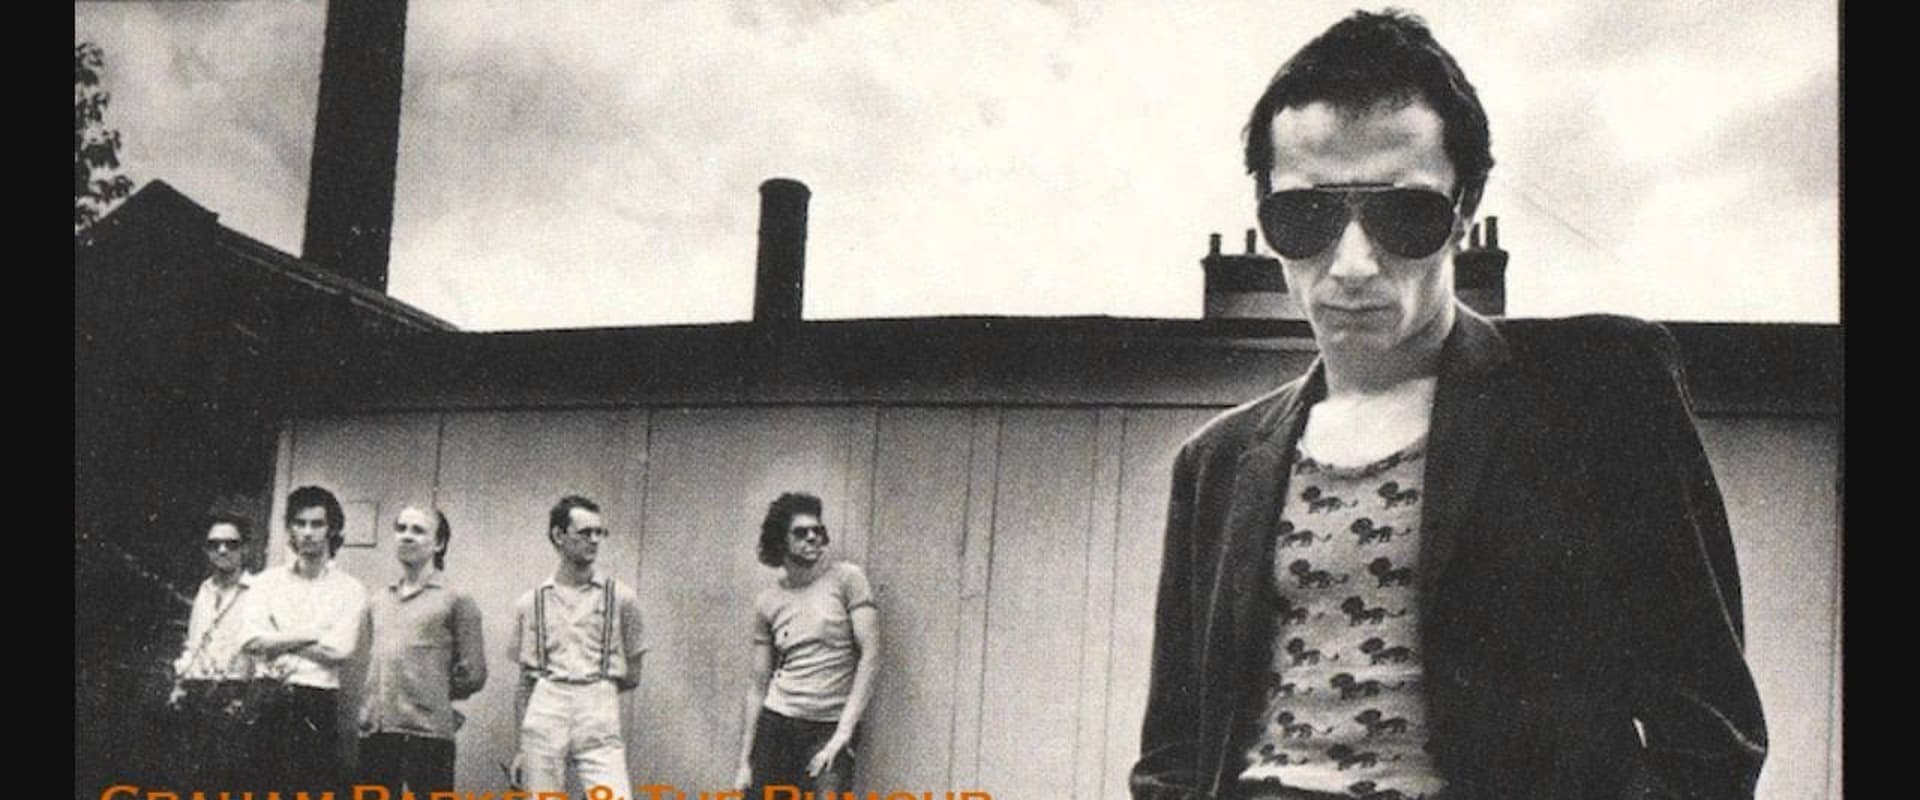 Graham Parker & The Rumour: This Is Live